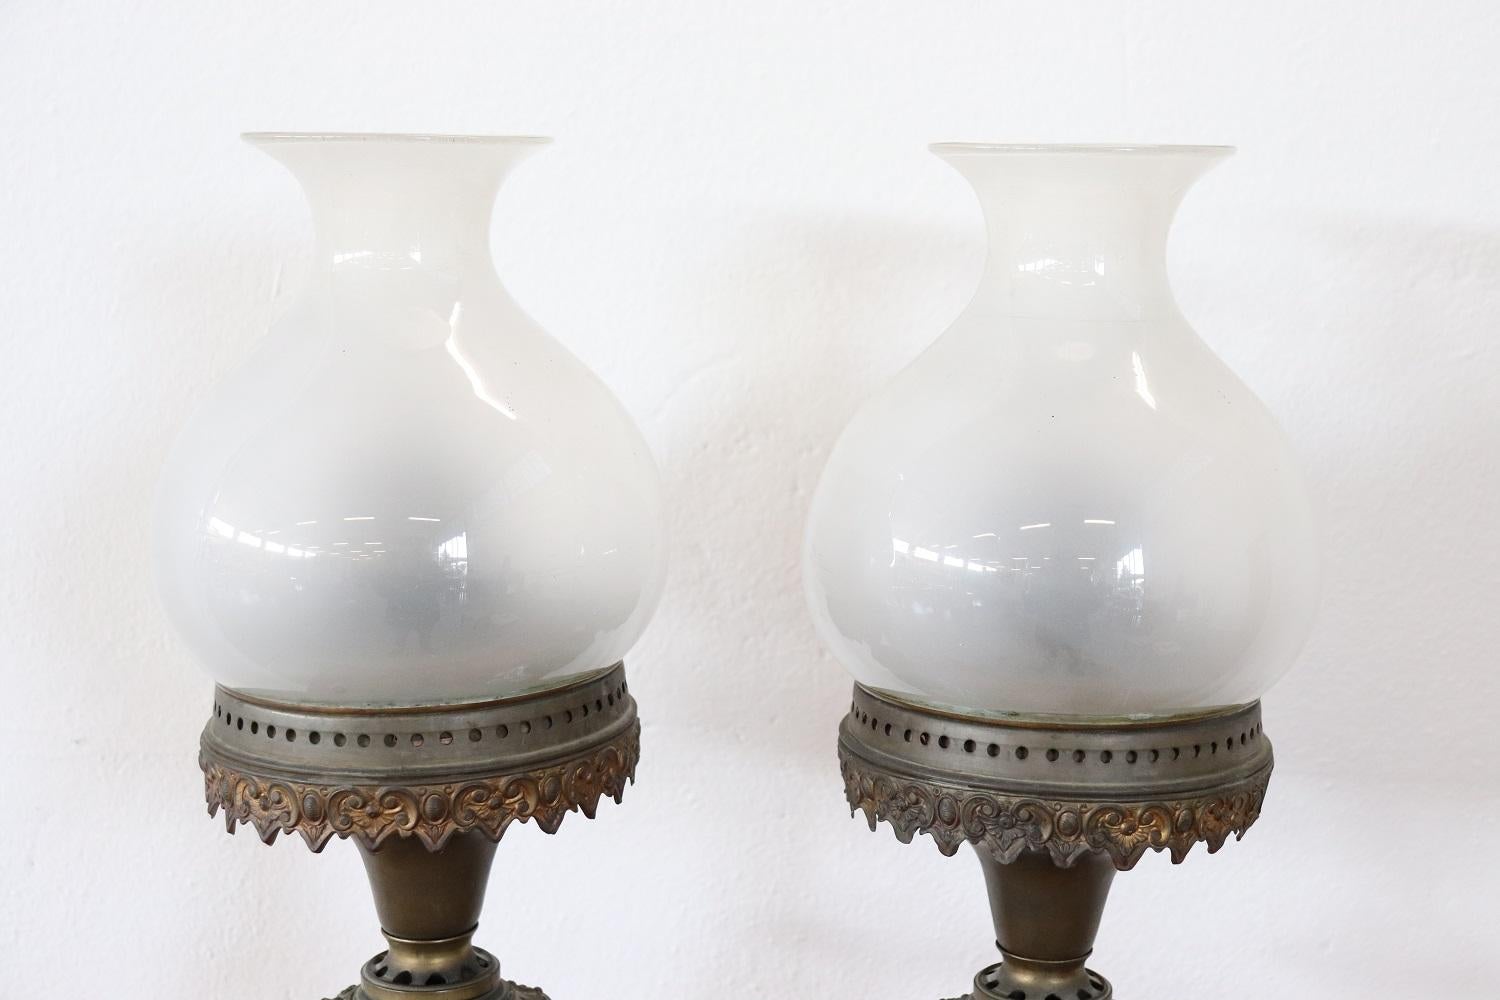 Beautiful antique table lamps in ceramic and finely chiselled bronze base. The ceramic is hand painted with floral and chinoiserie decorations. These lamps are ancient and originally worked with oil.